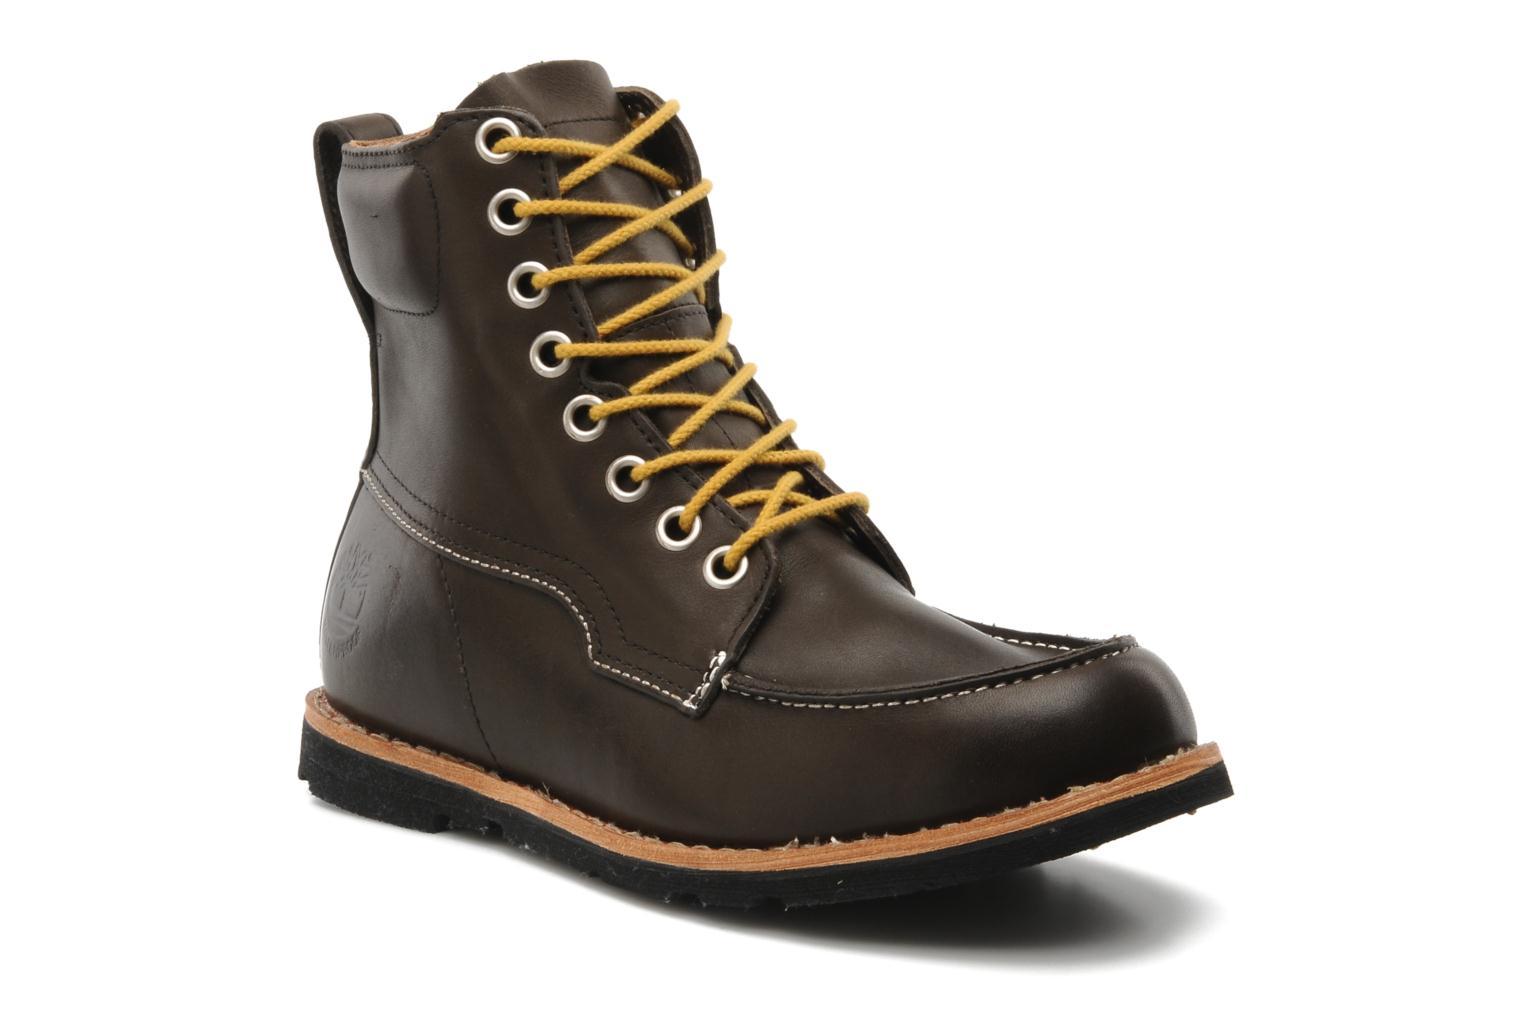 Foto Botines Timberland Earthkeepers original 2.0 rugged 6 moc toe boot Hombre foto 54568